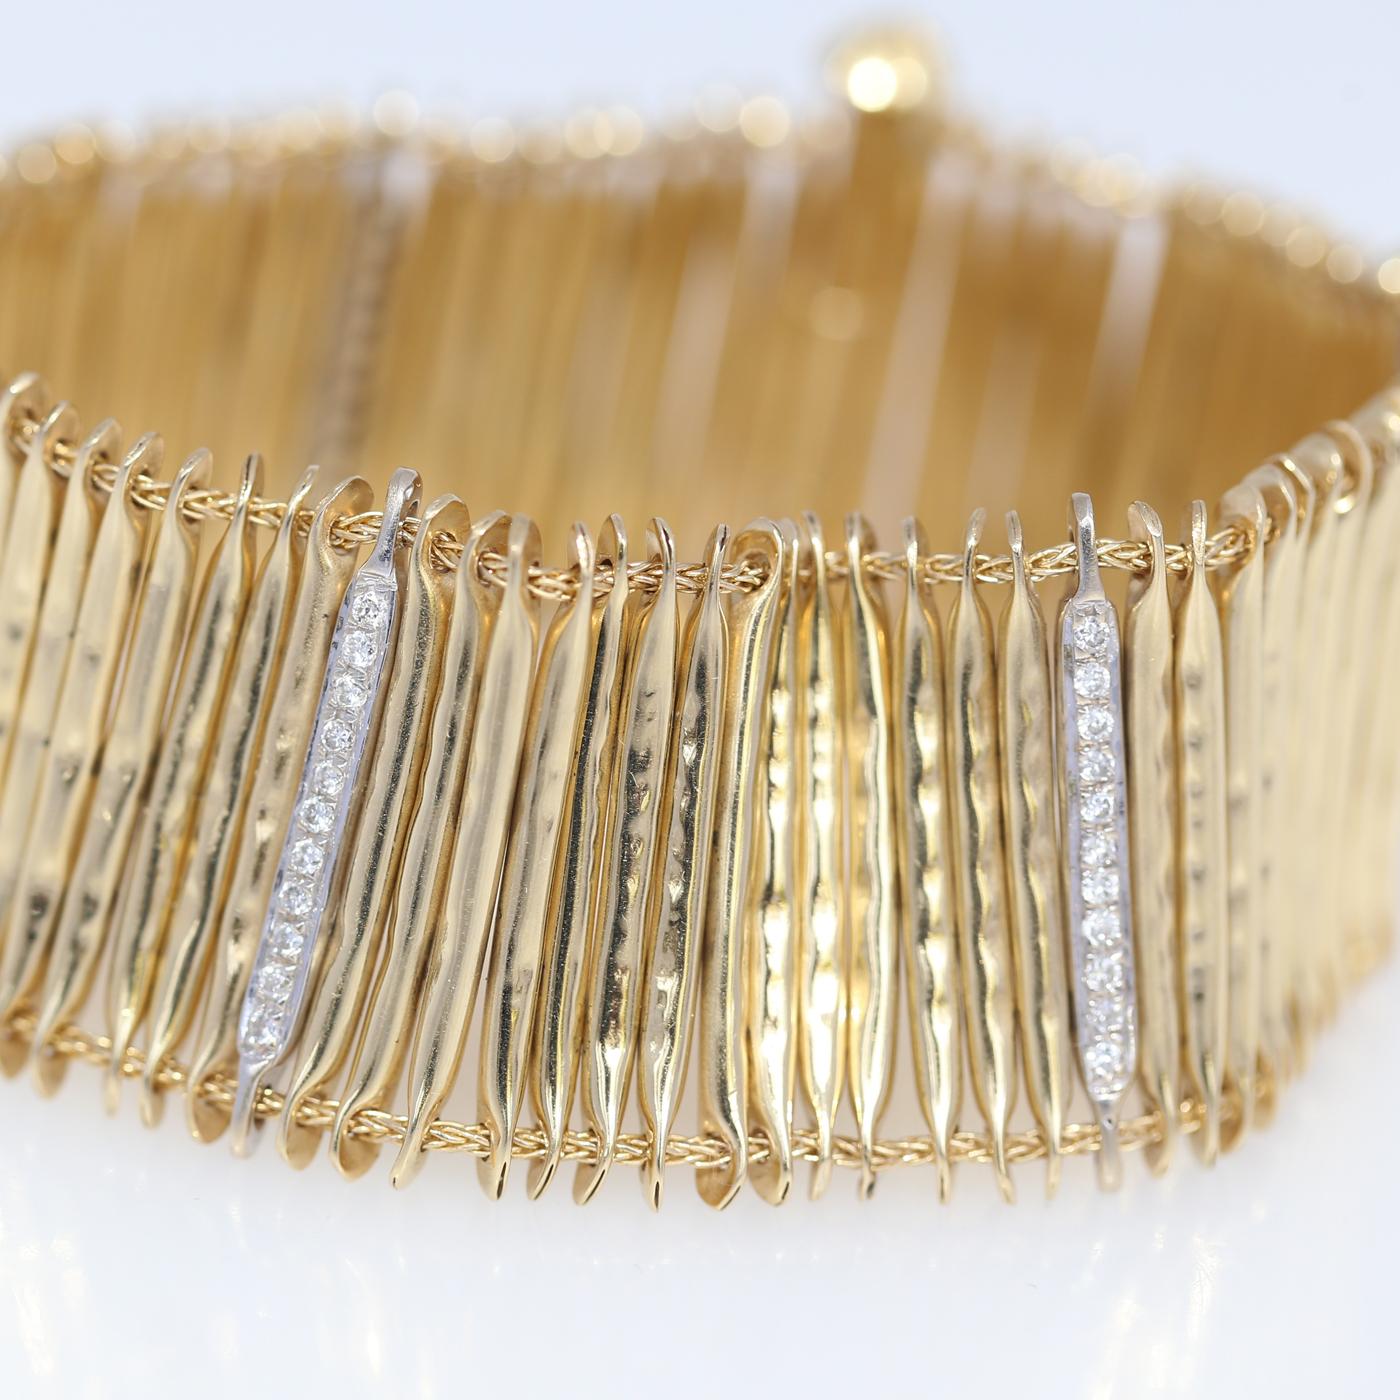 Fine 18K Yellow Gold bracelet with round-cut Diamonds. Immaculately executed bracelet comprising of Gold and Diamonds pods connected together. The structure emerges as a second skin on a hand. Long pin and security chain makes it easy to open and